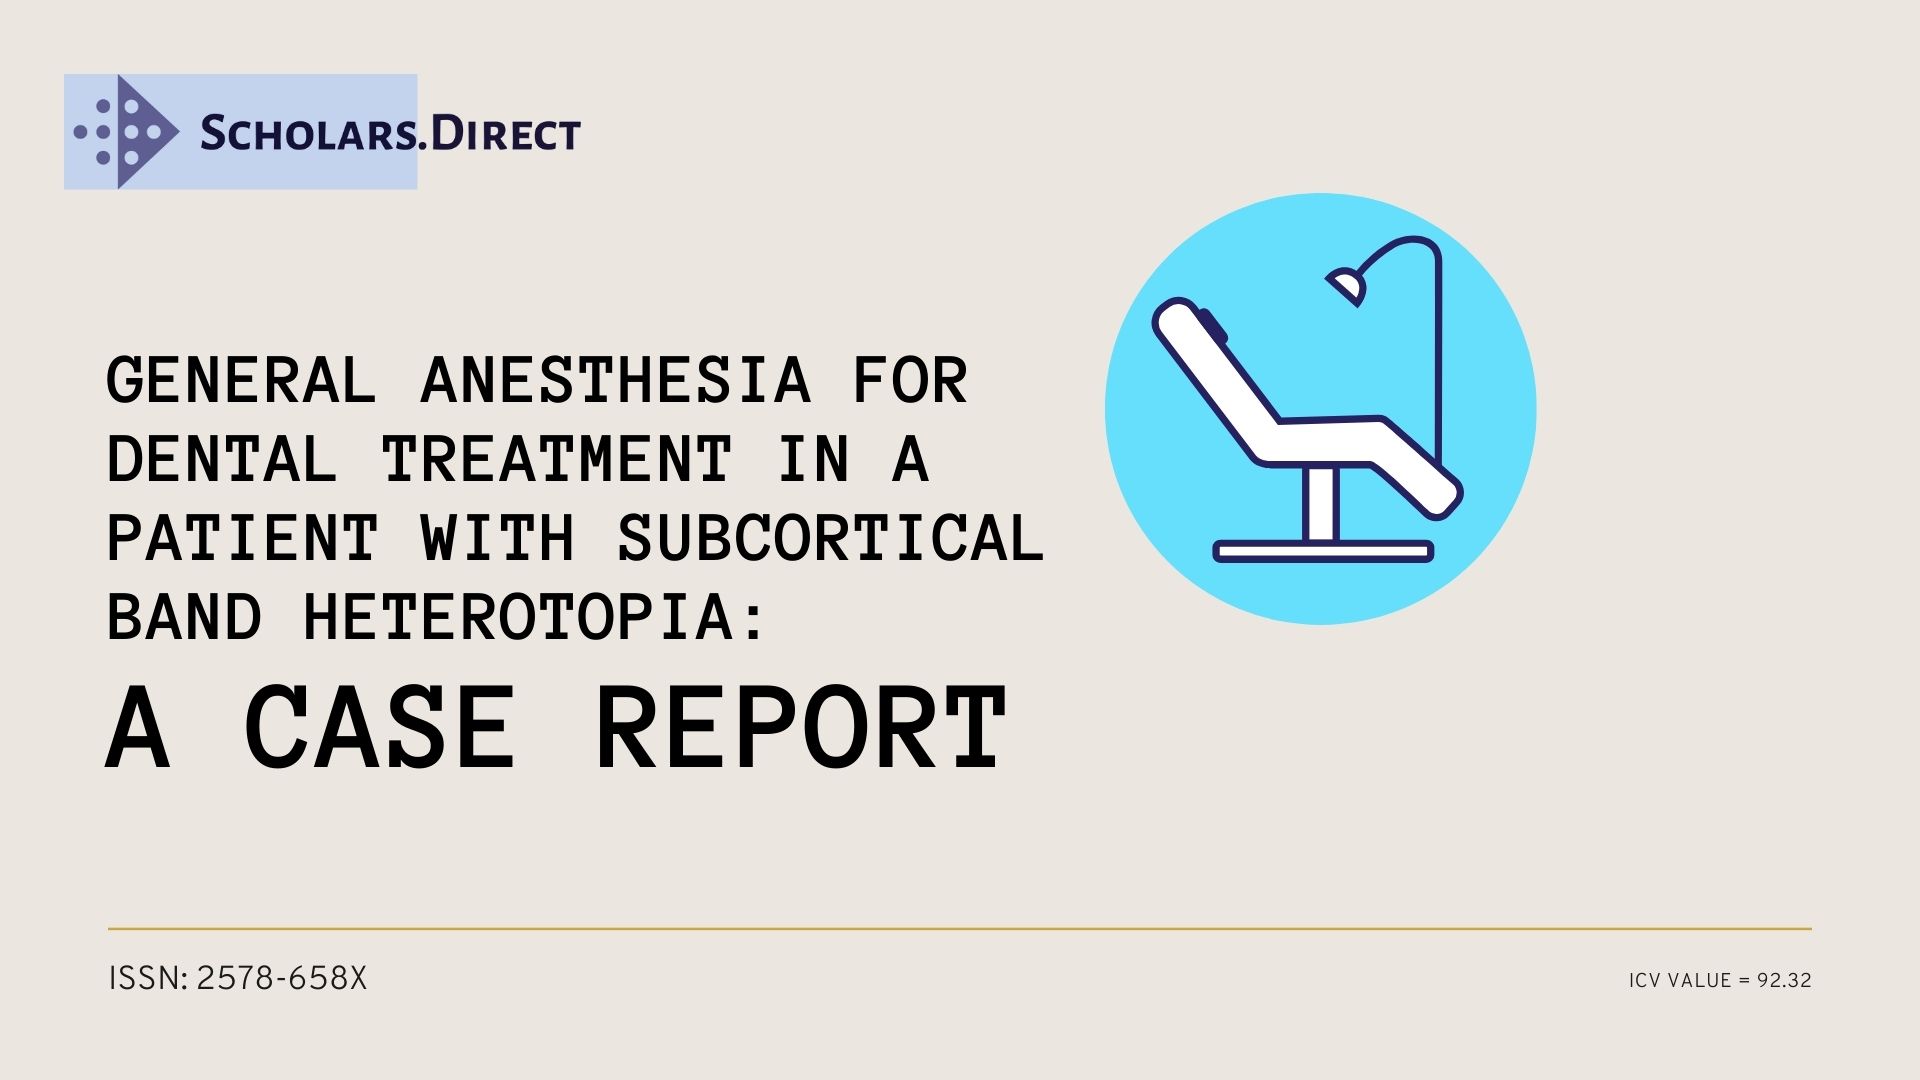 Journal of Anesthesia for Dental Treatment